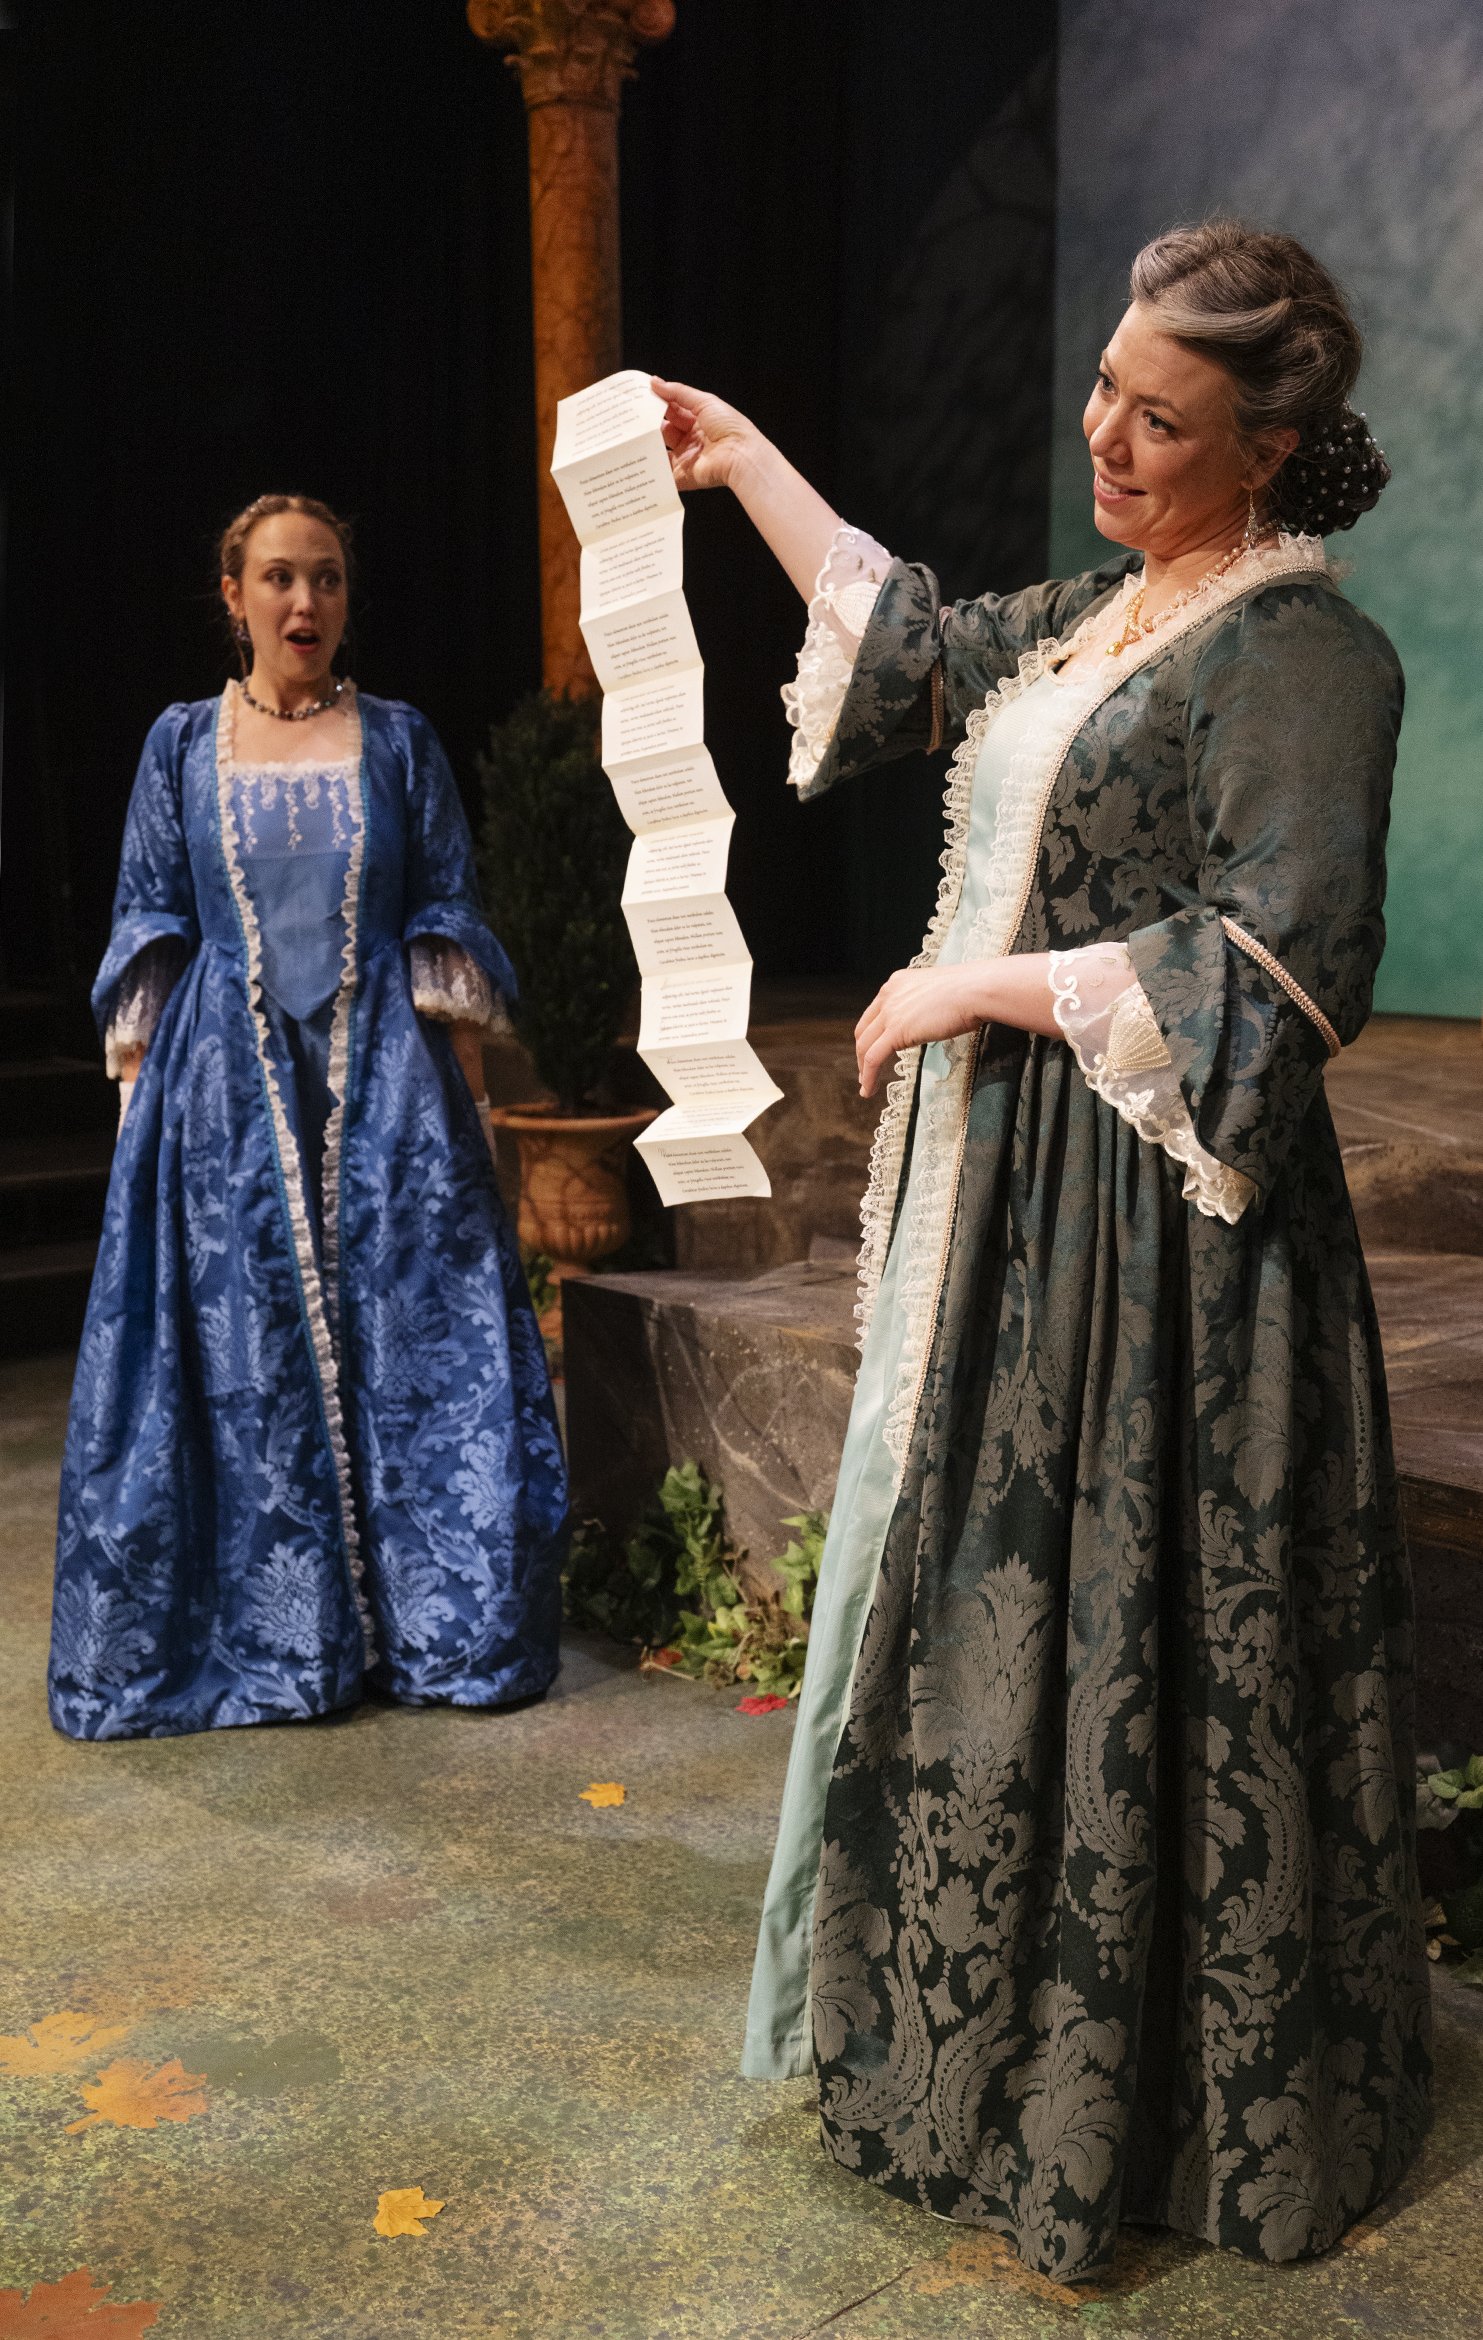 Sophie Gibson Rush as Katharine and Chelsea Bowdren as Maria. Photo by Tim Fuller.